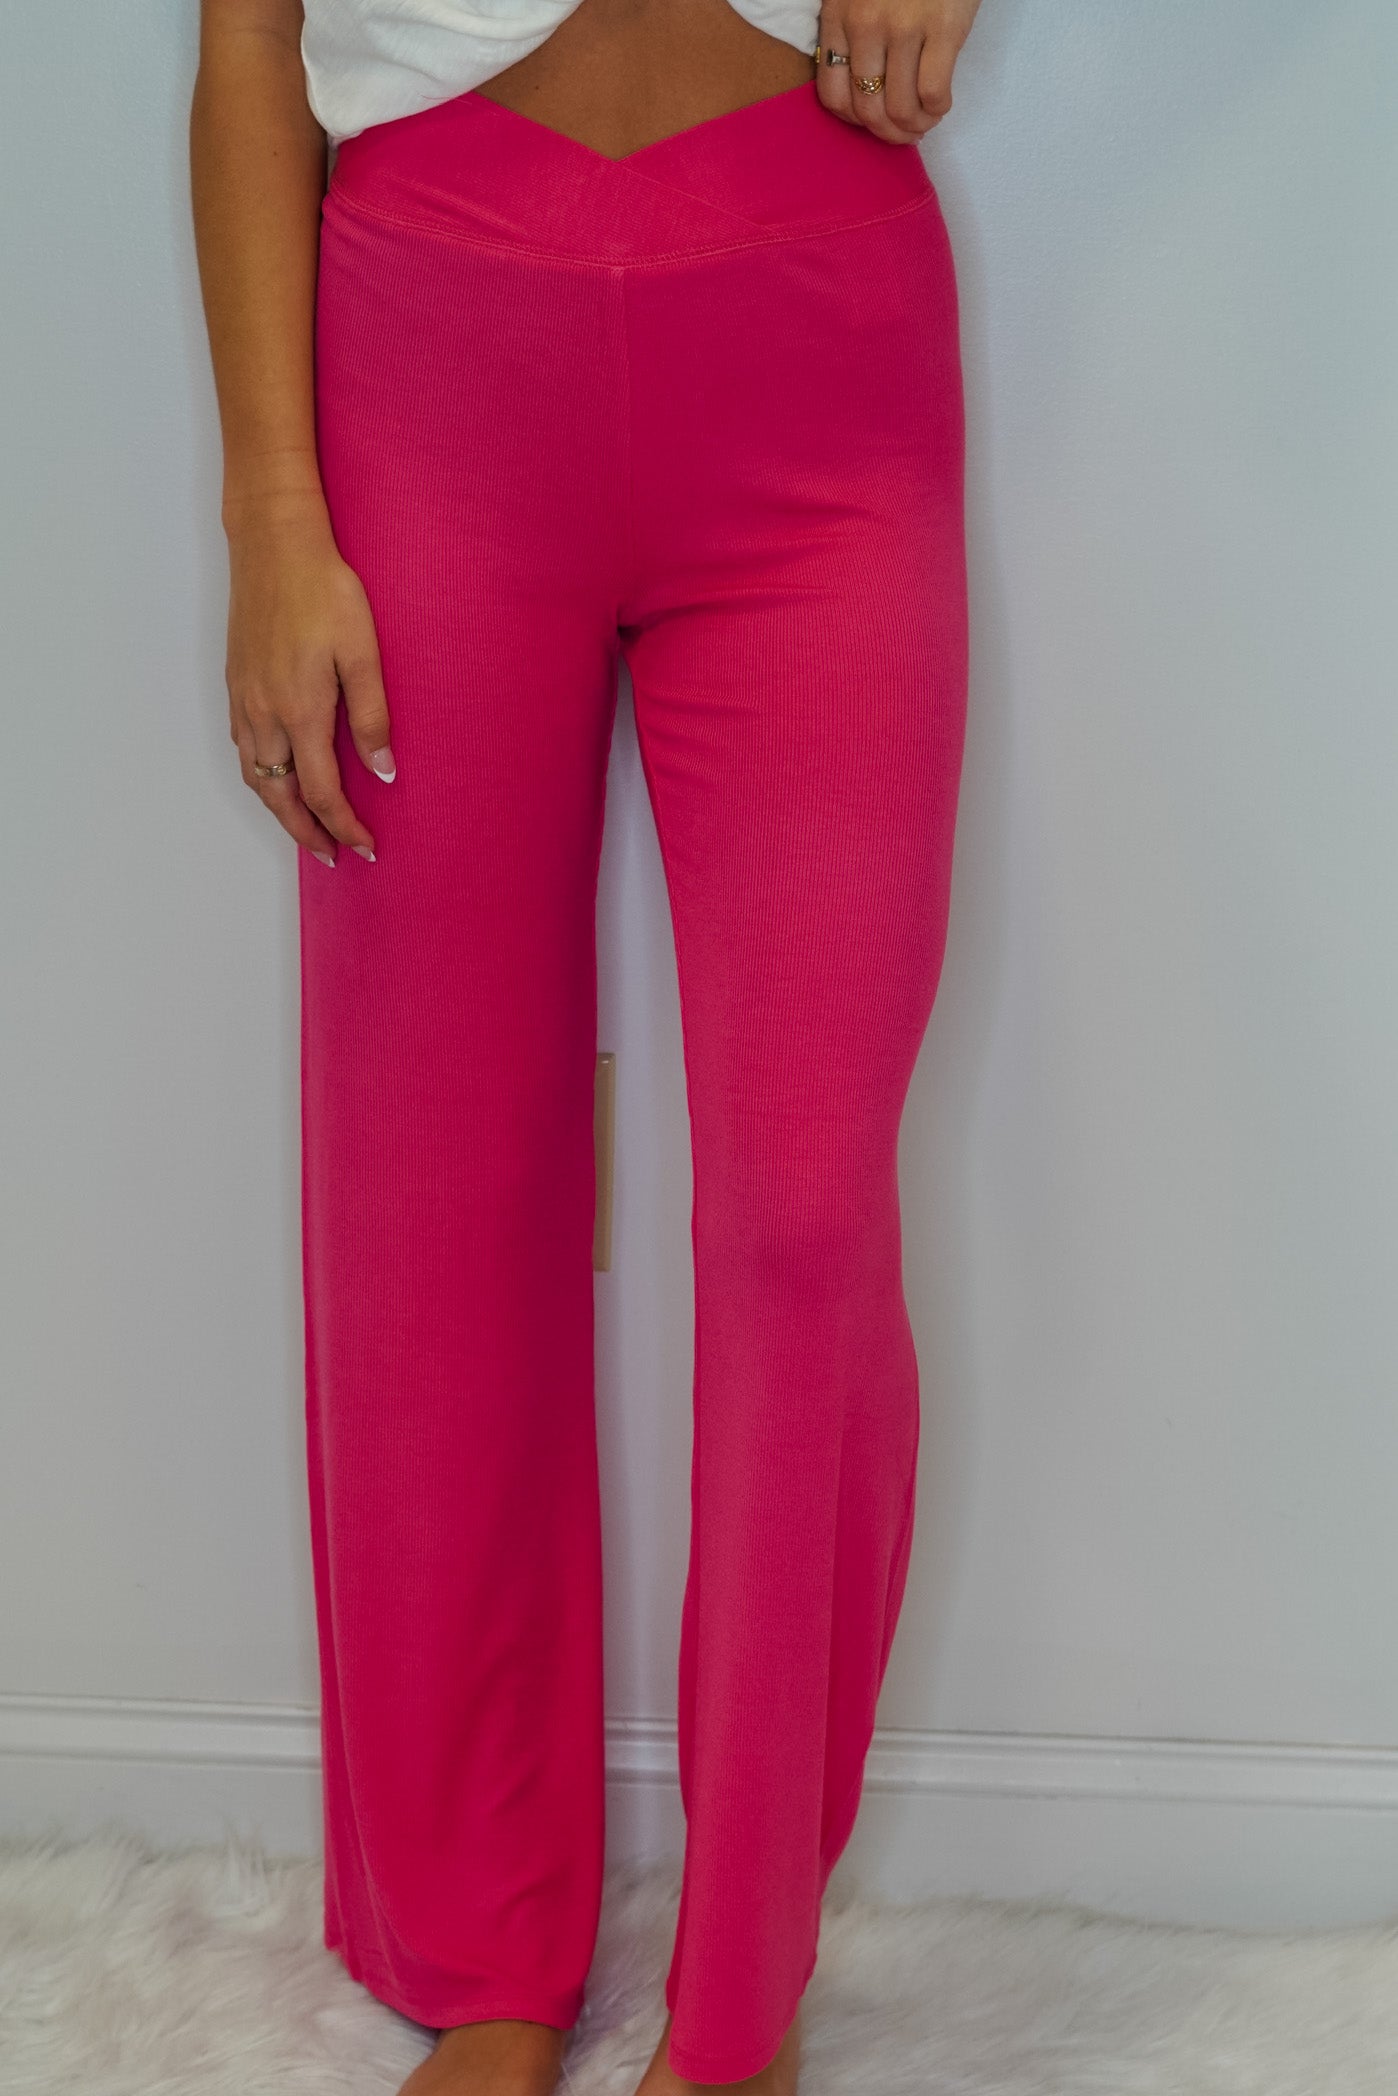 Modal softness with the perfect amount of spandex stretch makes our 2X2 Rib fabric irresistibly soft. The Crossover Rib Pants are perfect for that high-rise + crop top vintage trend.  Fabric Content: 96% Modal 4% Spandex